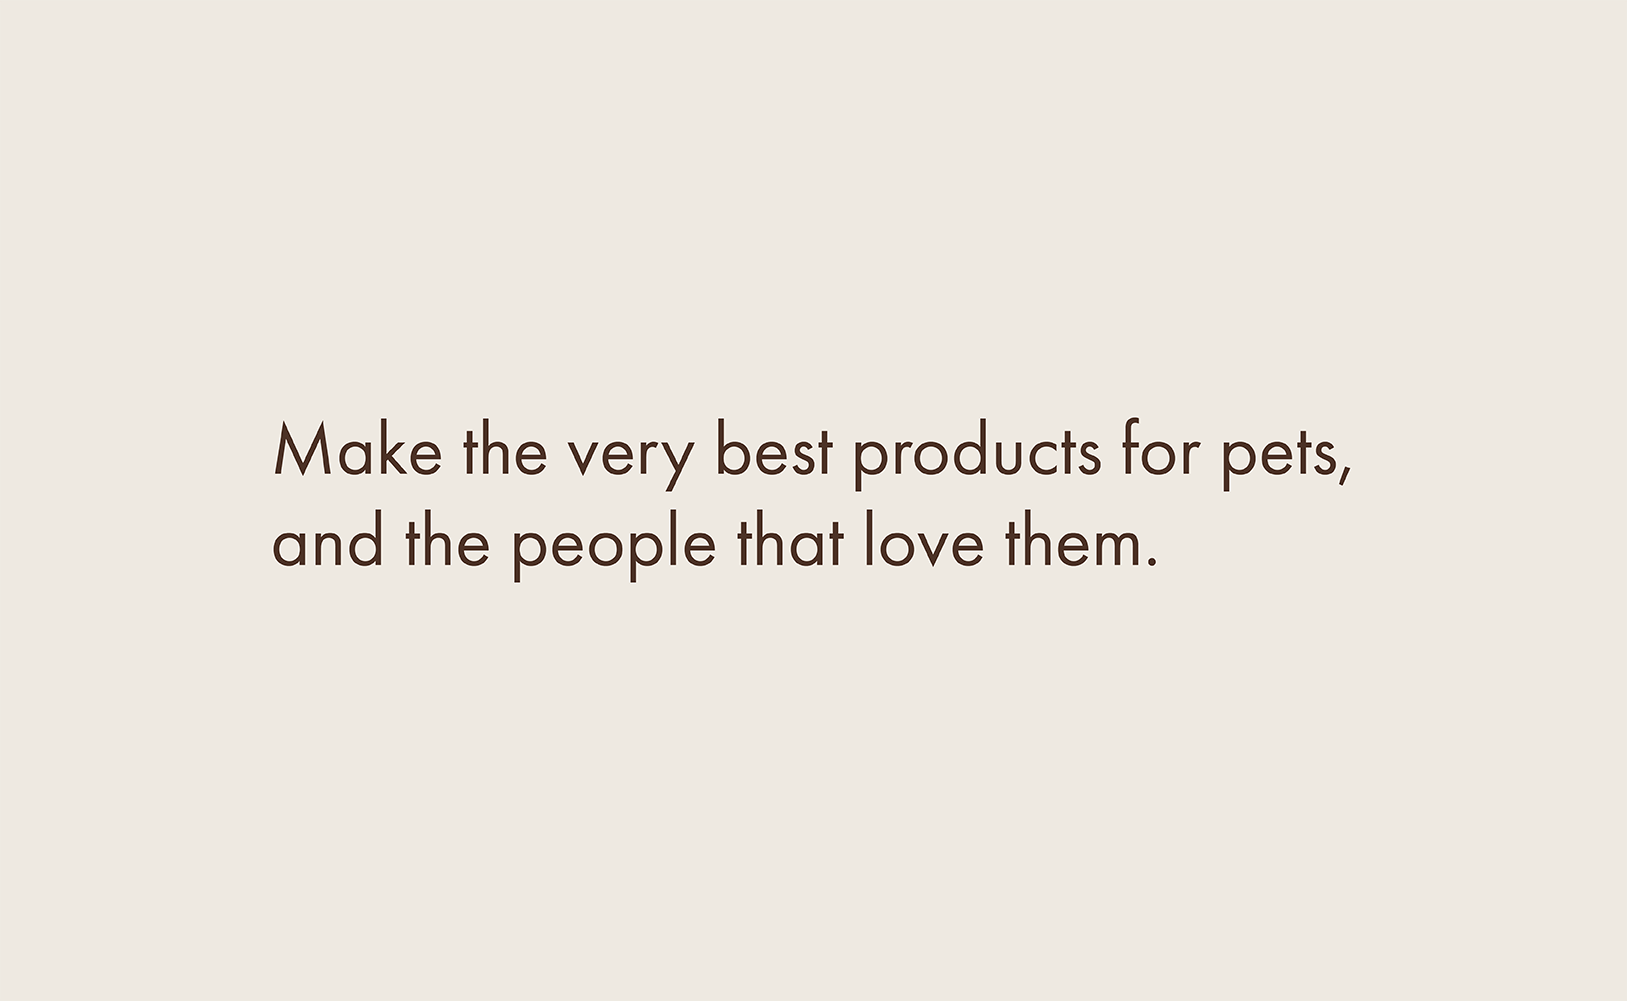 Make the very best products for pets, and the people that love them.